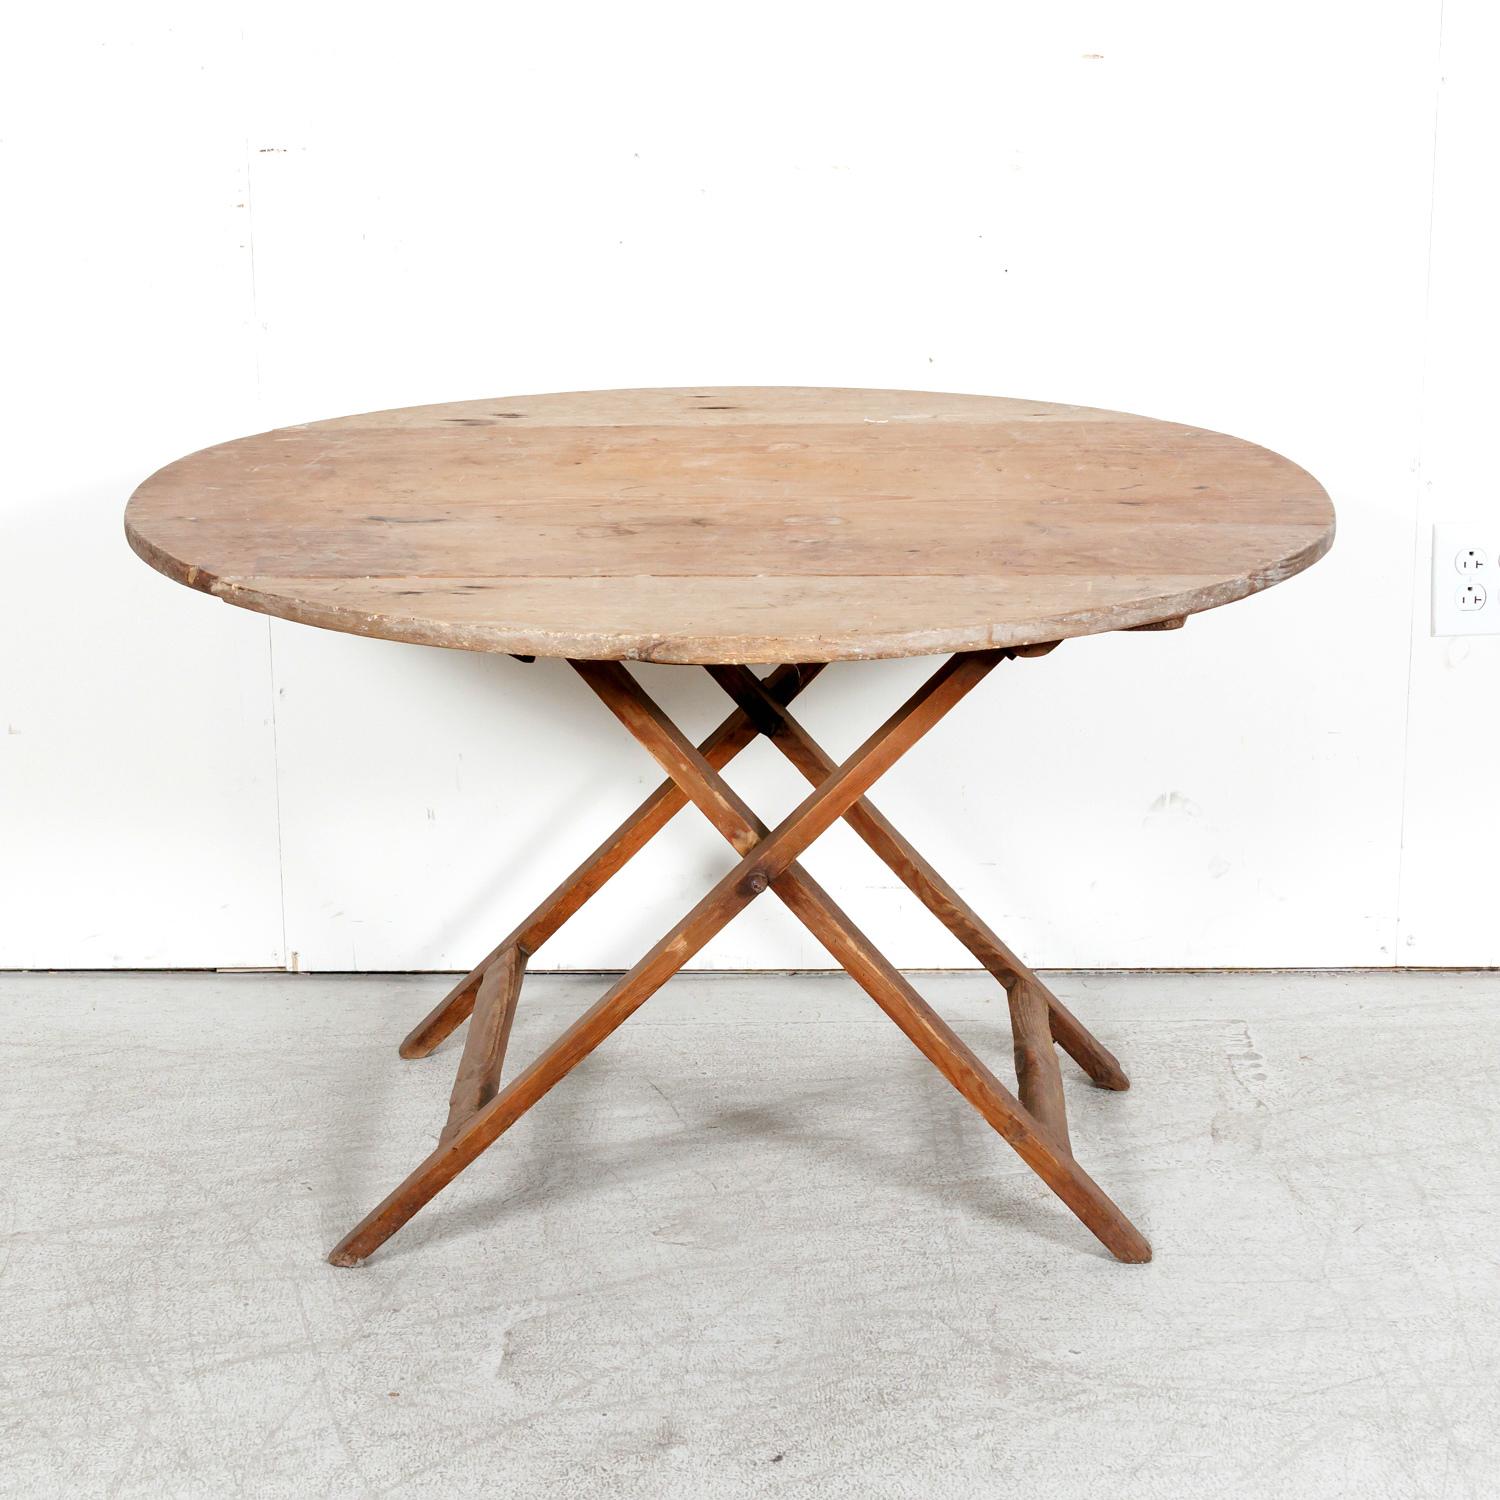 A 19th century rustic French campaign or coach table handcrafted of pine in the South of France, circa 1890s. Having a slightly oval plank top with a beautiful sun bleached patina from over a century of use under the hot Provençal sun. Raised on a